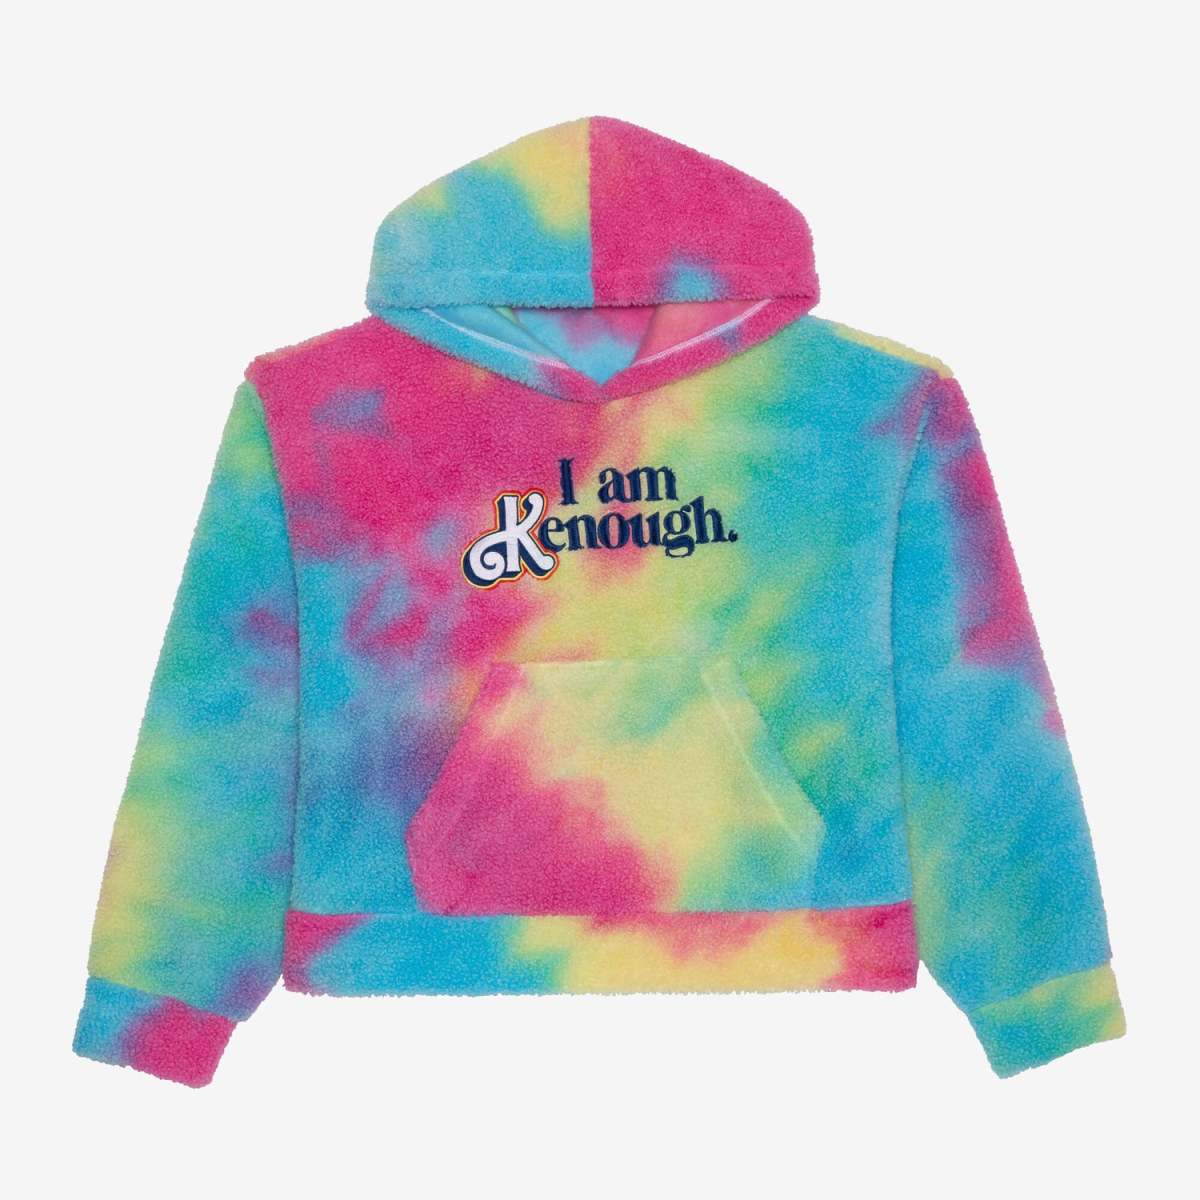 Of Course Mattel Is Selling That 'I Am Kenough' Hoodie - Fashionista